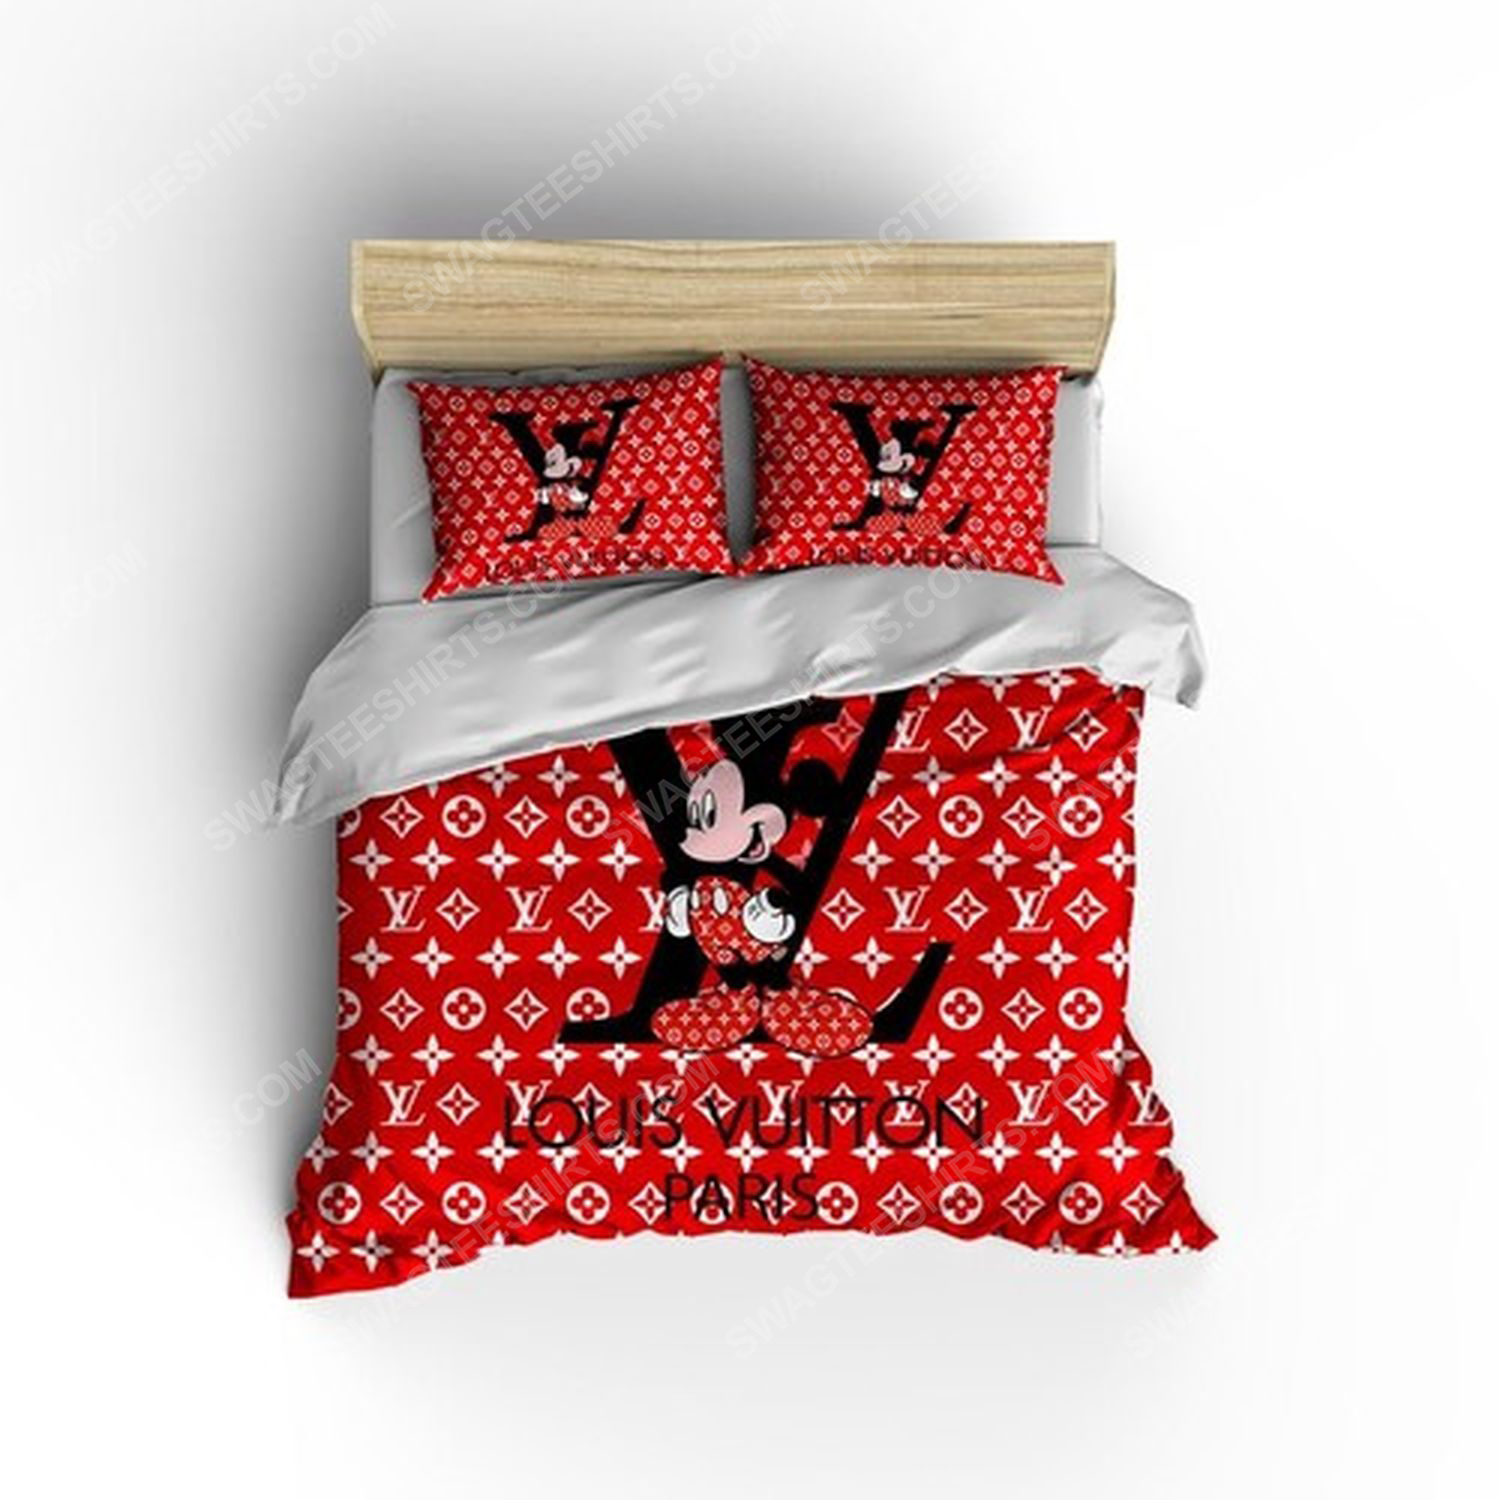 [special edition] Lv and mickey mouse full print duvet cover bedding set – maria